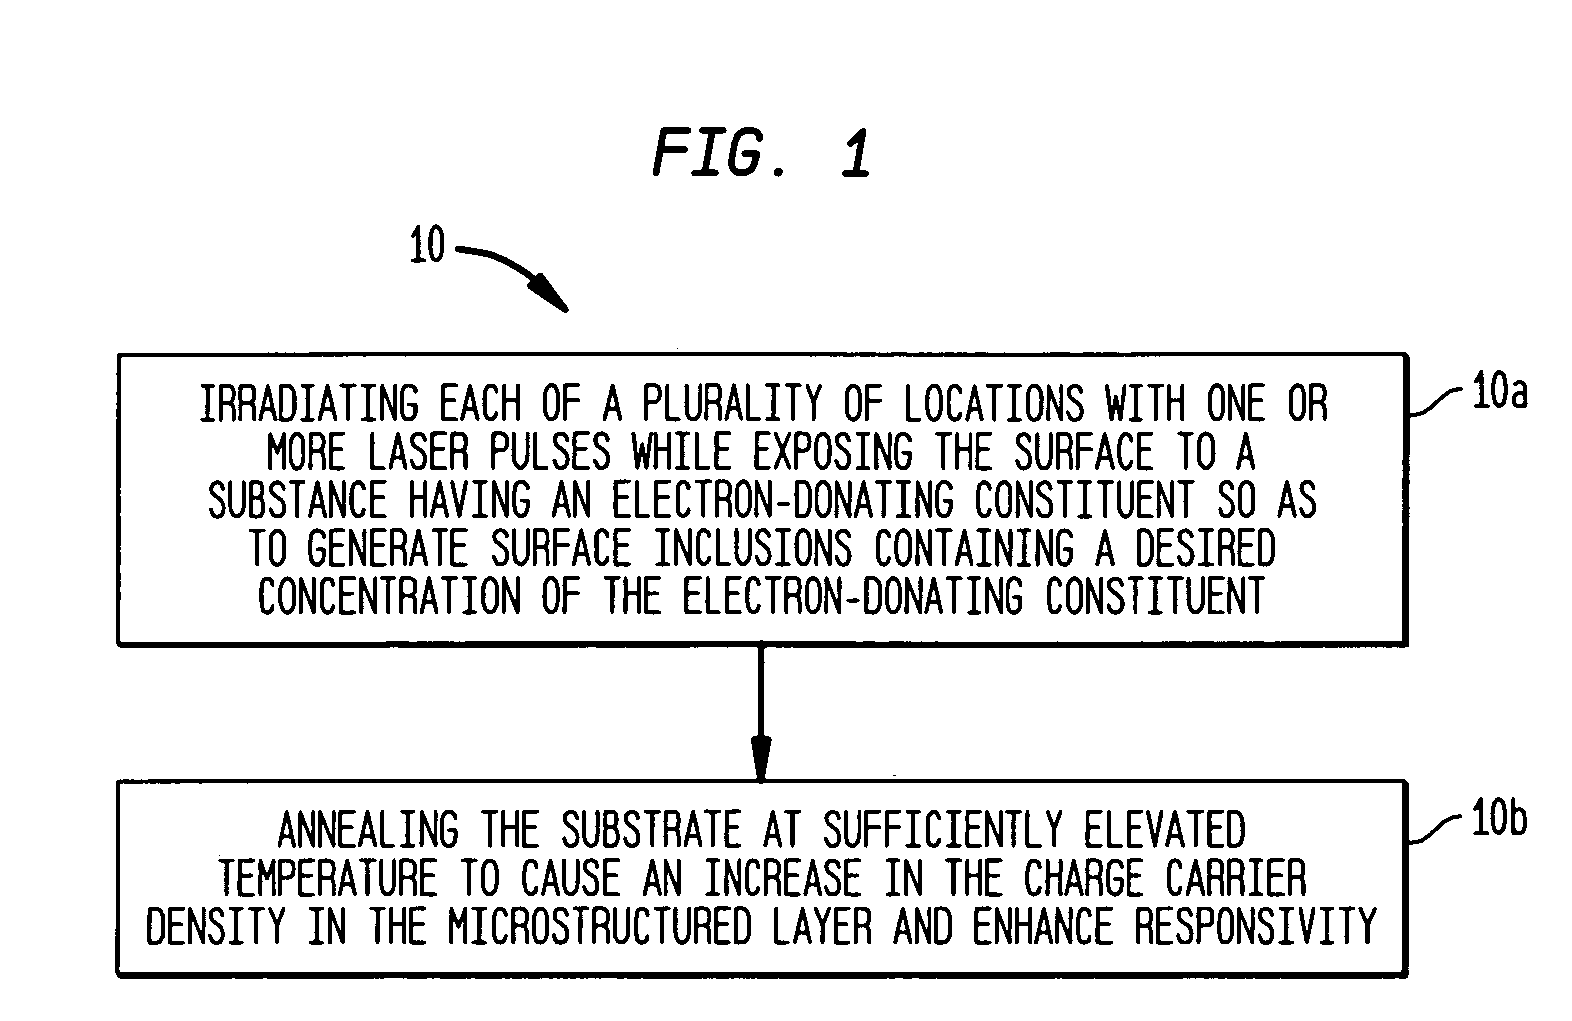 Silicon-based visible and near-infrared optoelectric devices